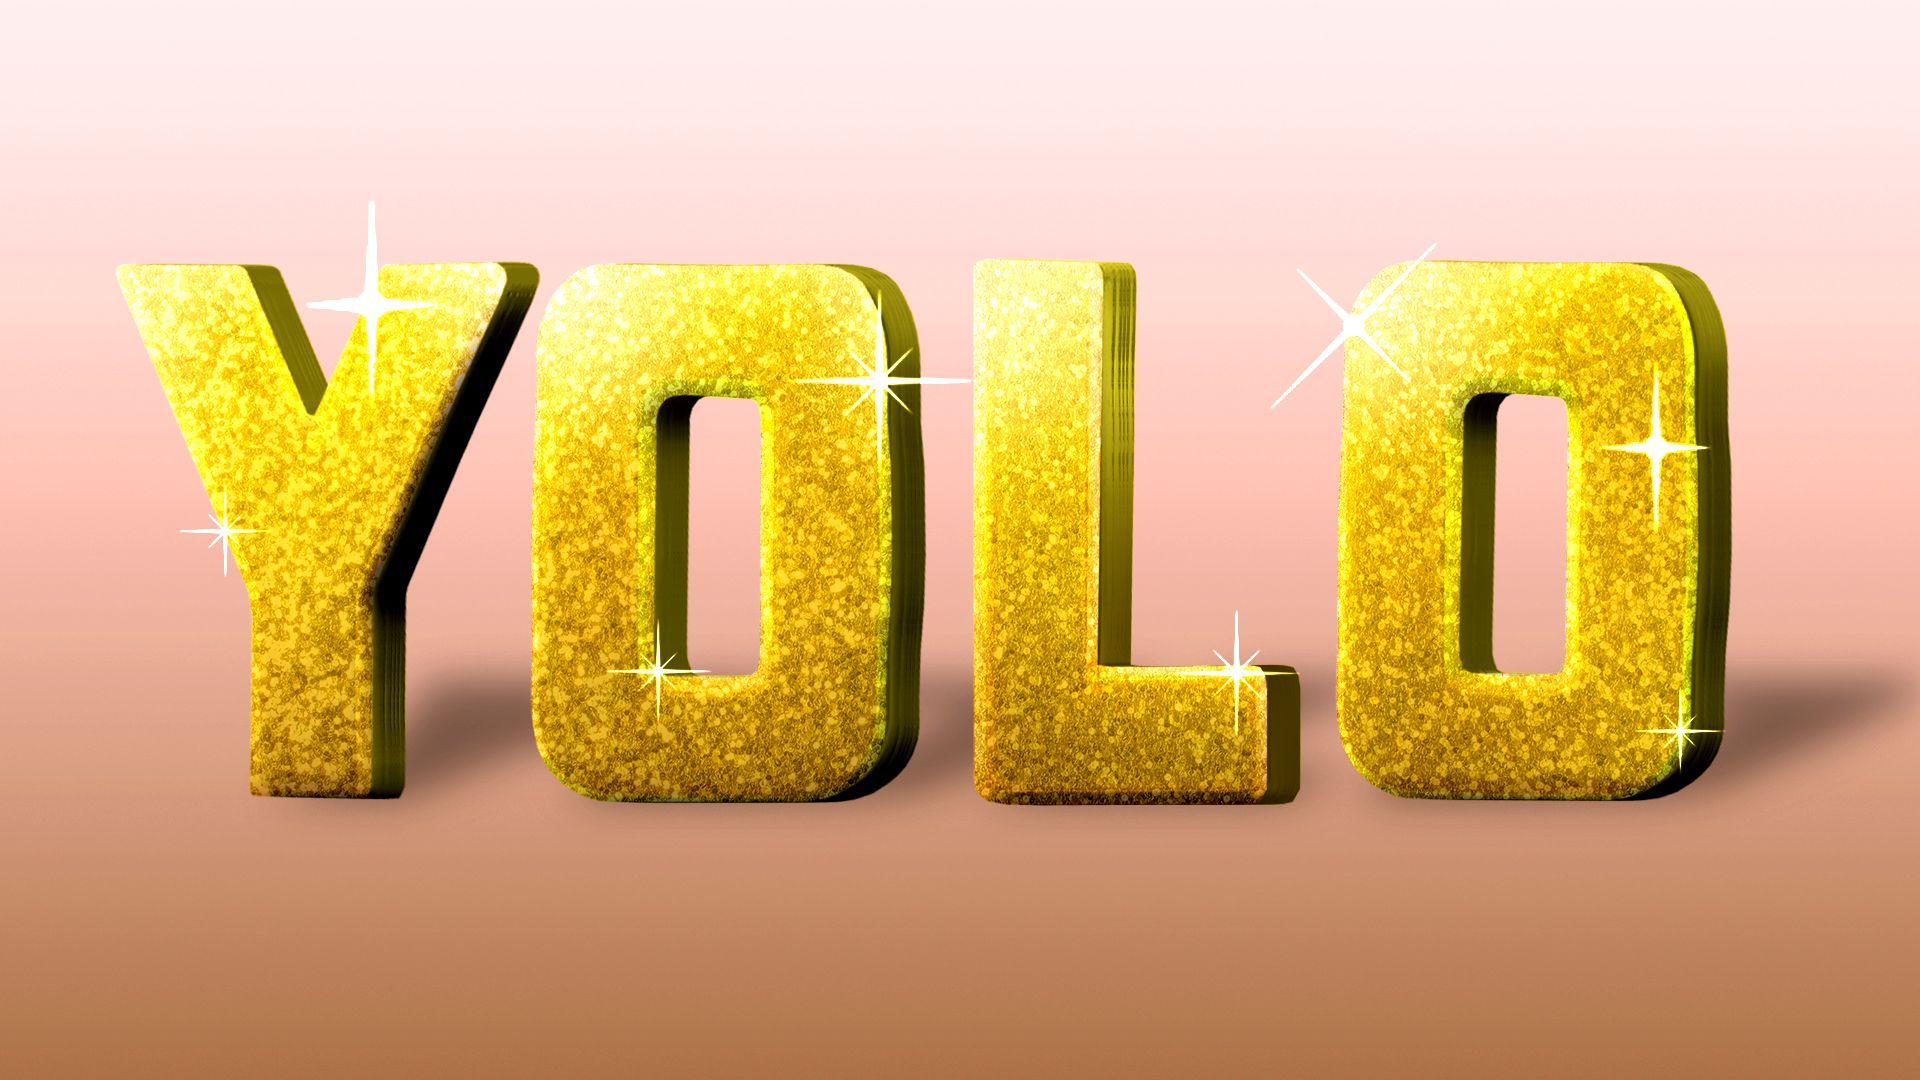 Illustration of the letters YOLO made from shining gold